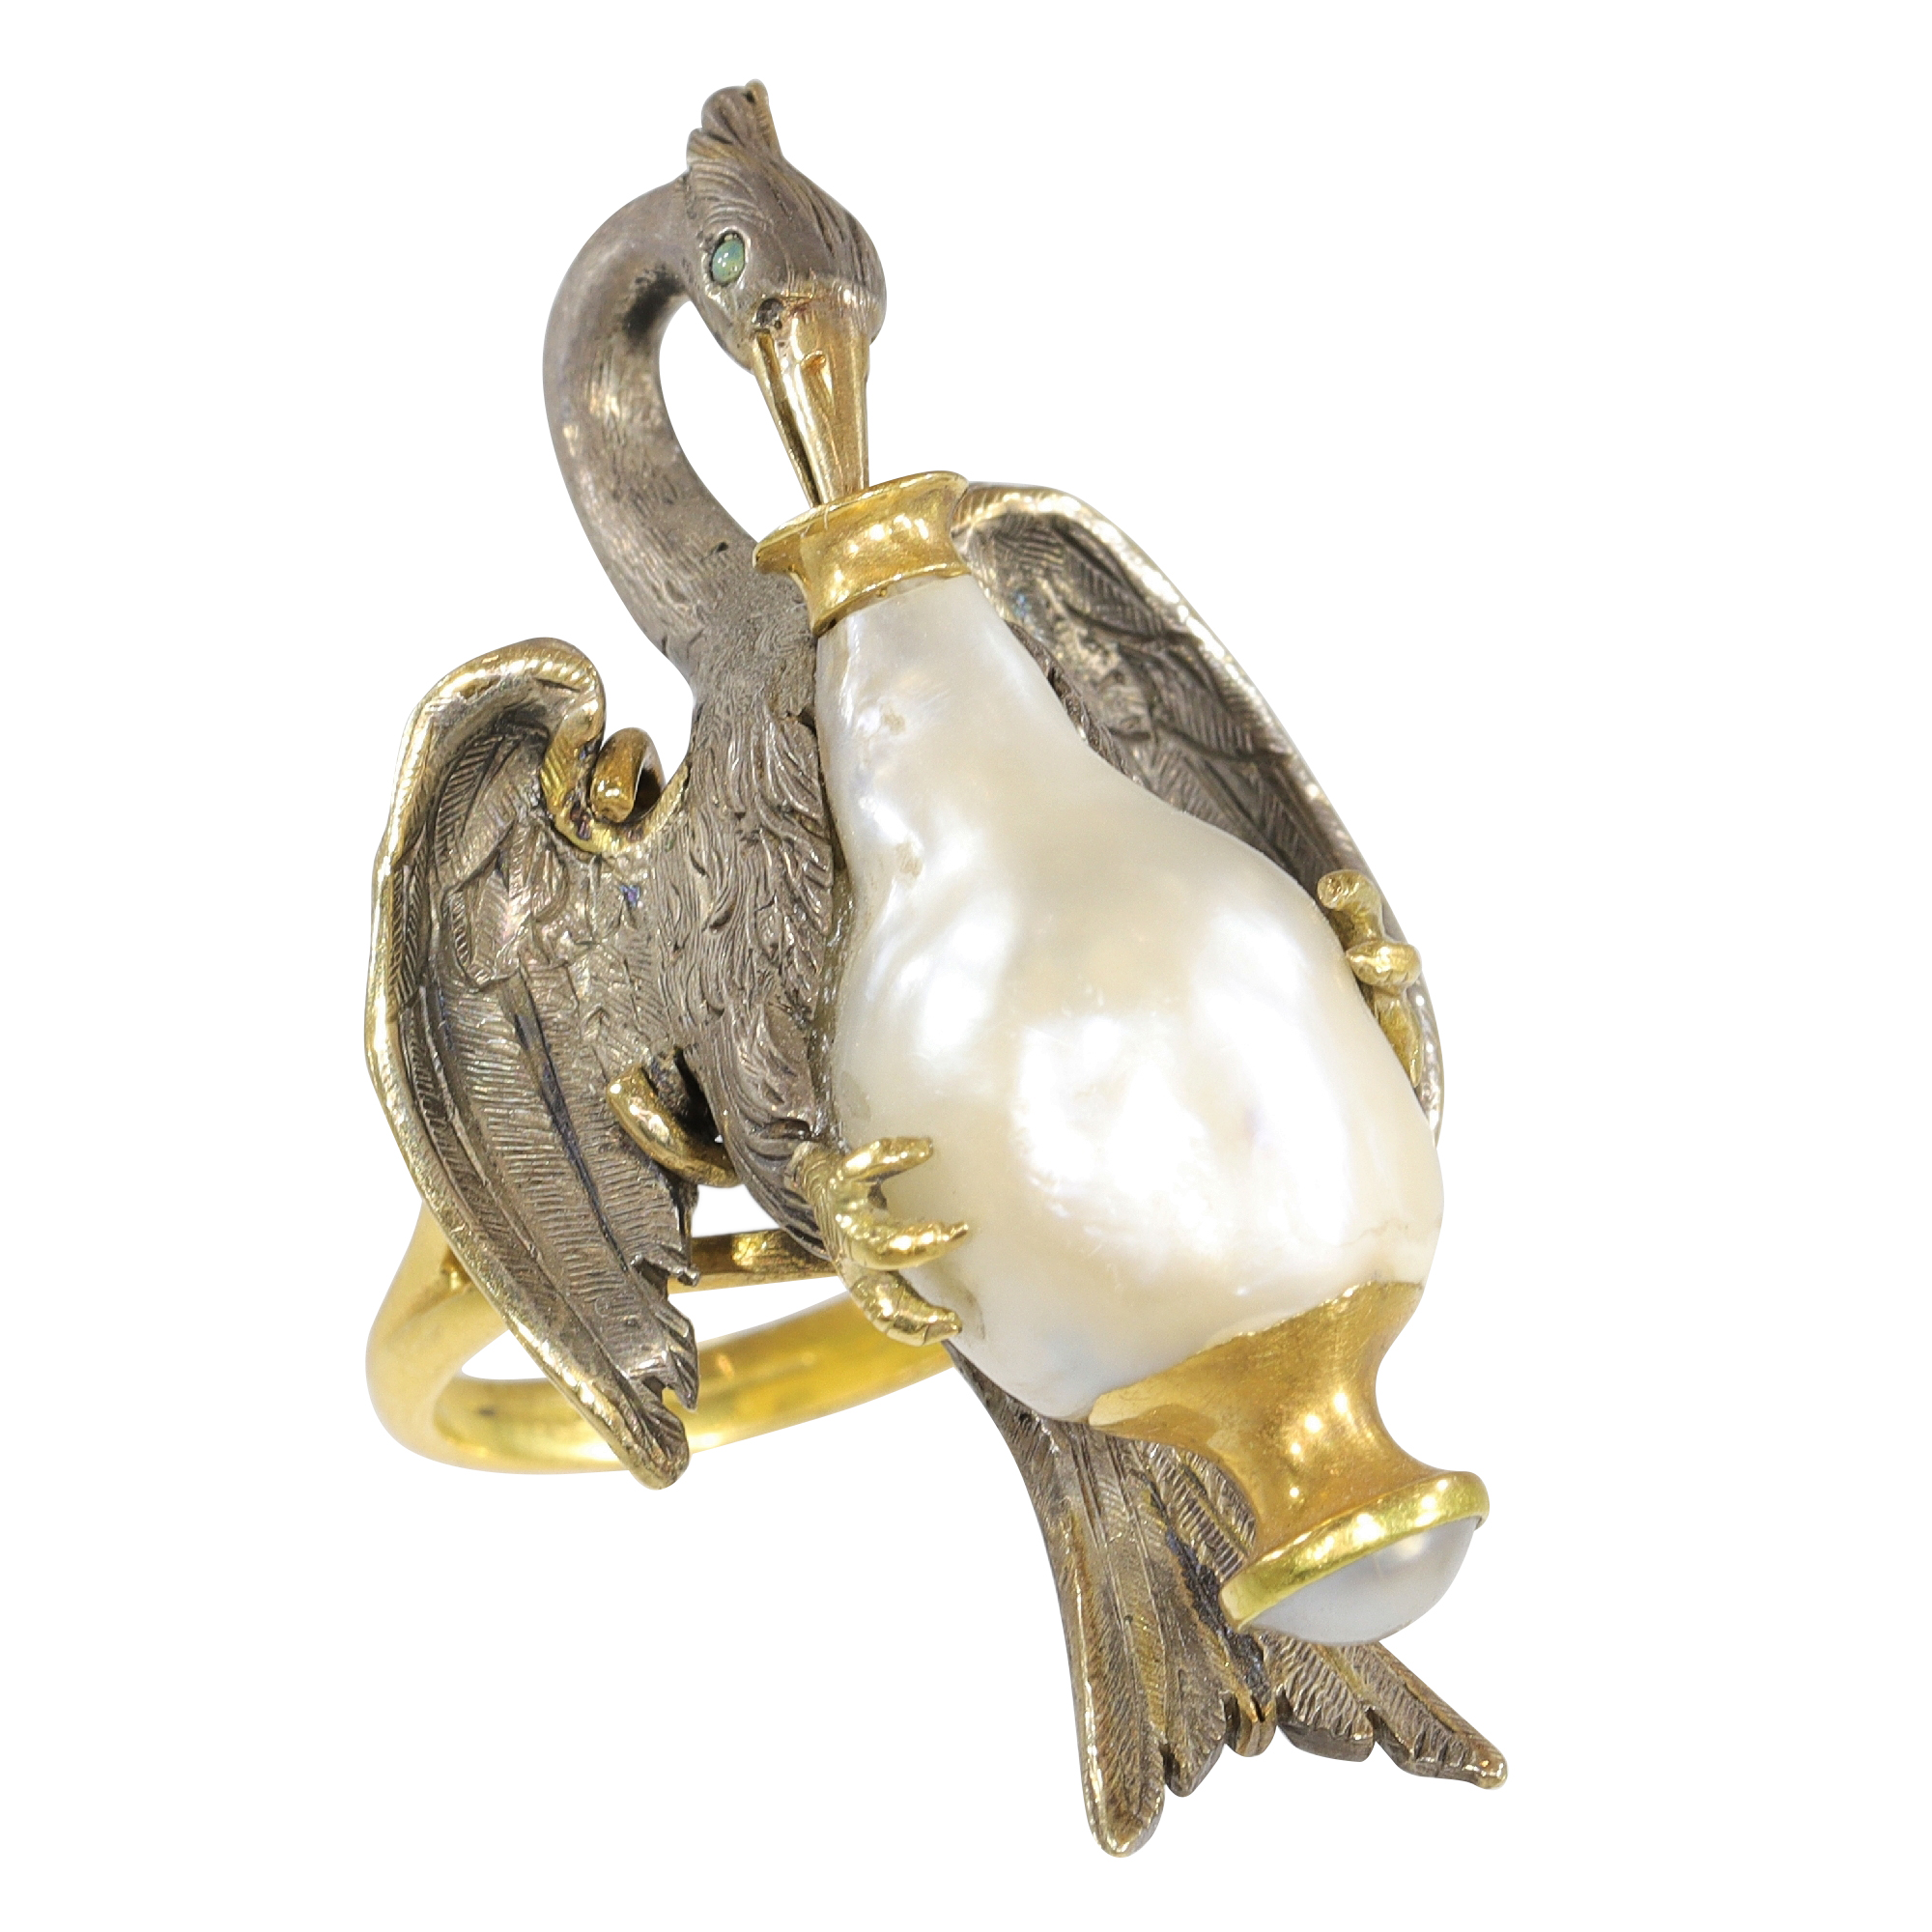 https://images.adin-antique-jewelry.com/09/357/h/09357-4261.p00_L%20Art%20du%20Fable%20%2018K%20Gold%20Stork%20and%20Pearl%20Ring%20from%20Victorian%20France-en.jpg